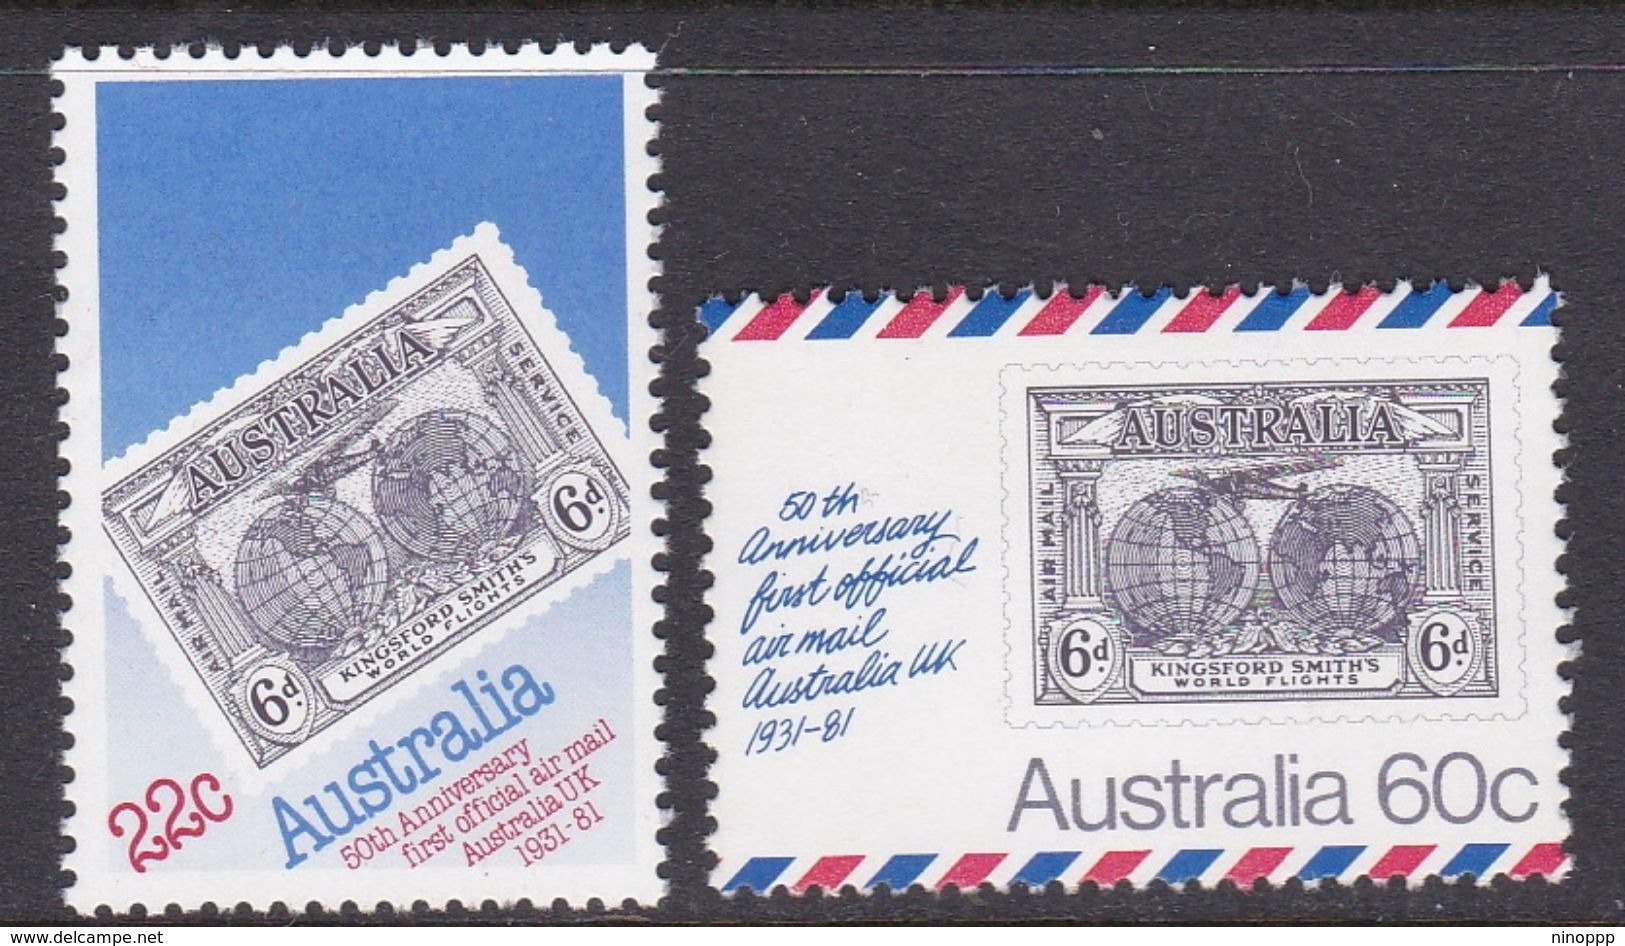 Australia ASC 794-795 1981 50th Anniversary First Flight, Mint Never Hinged - Mint Stamps